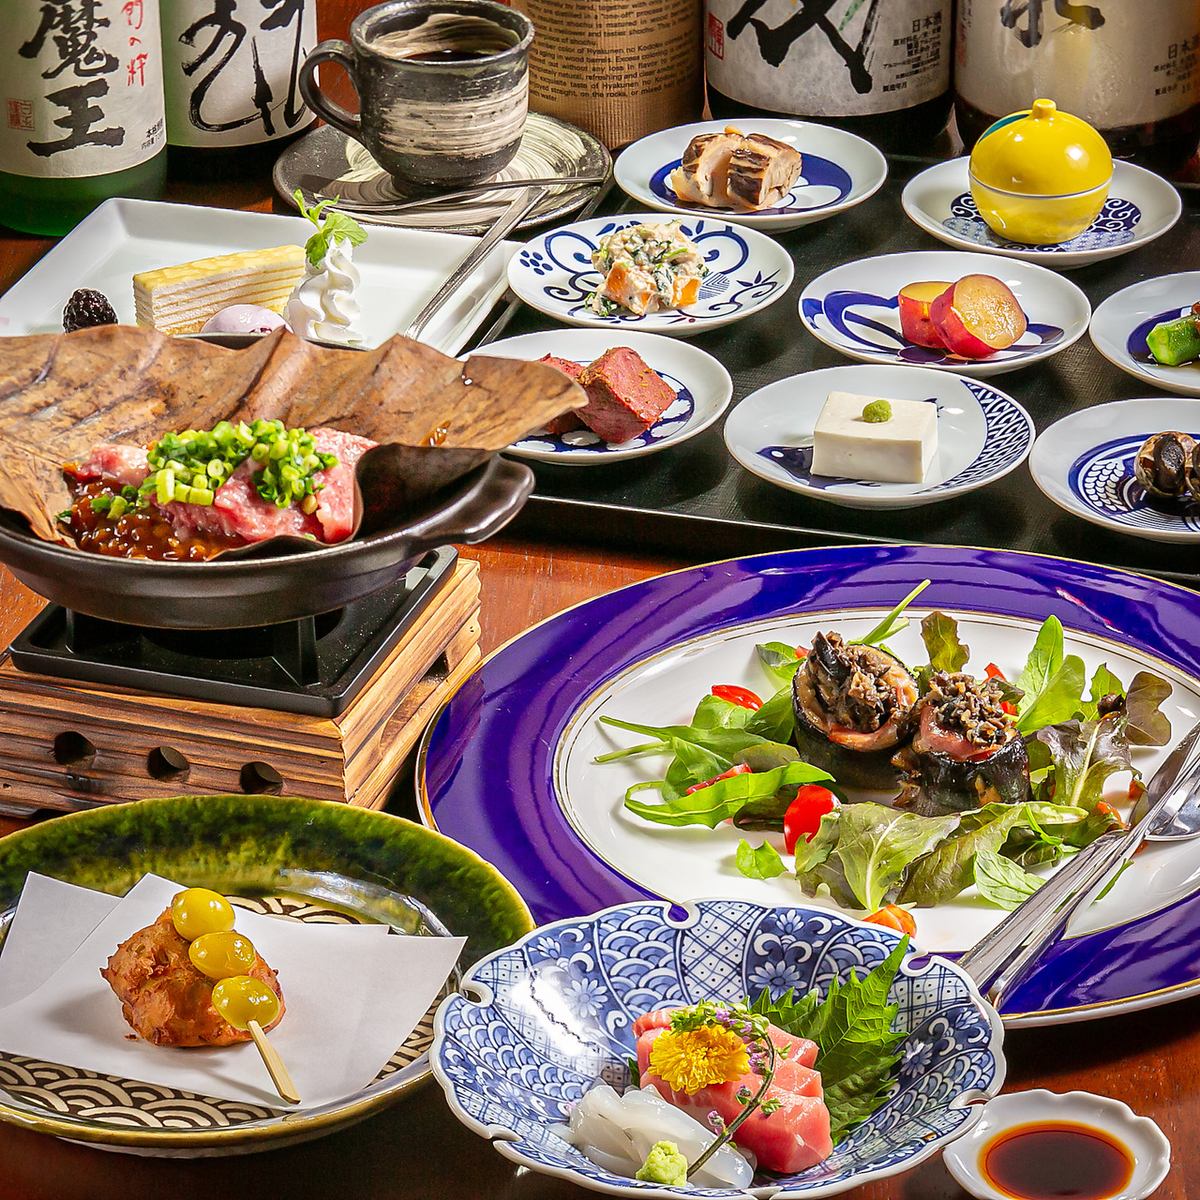 Enjoy a special lunch of Japanese and Western cuisine in an elegant Japanese space!